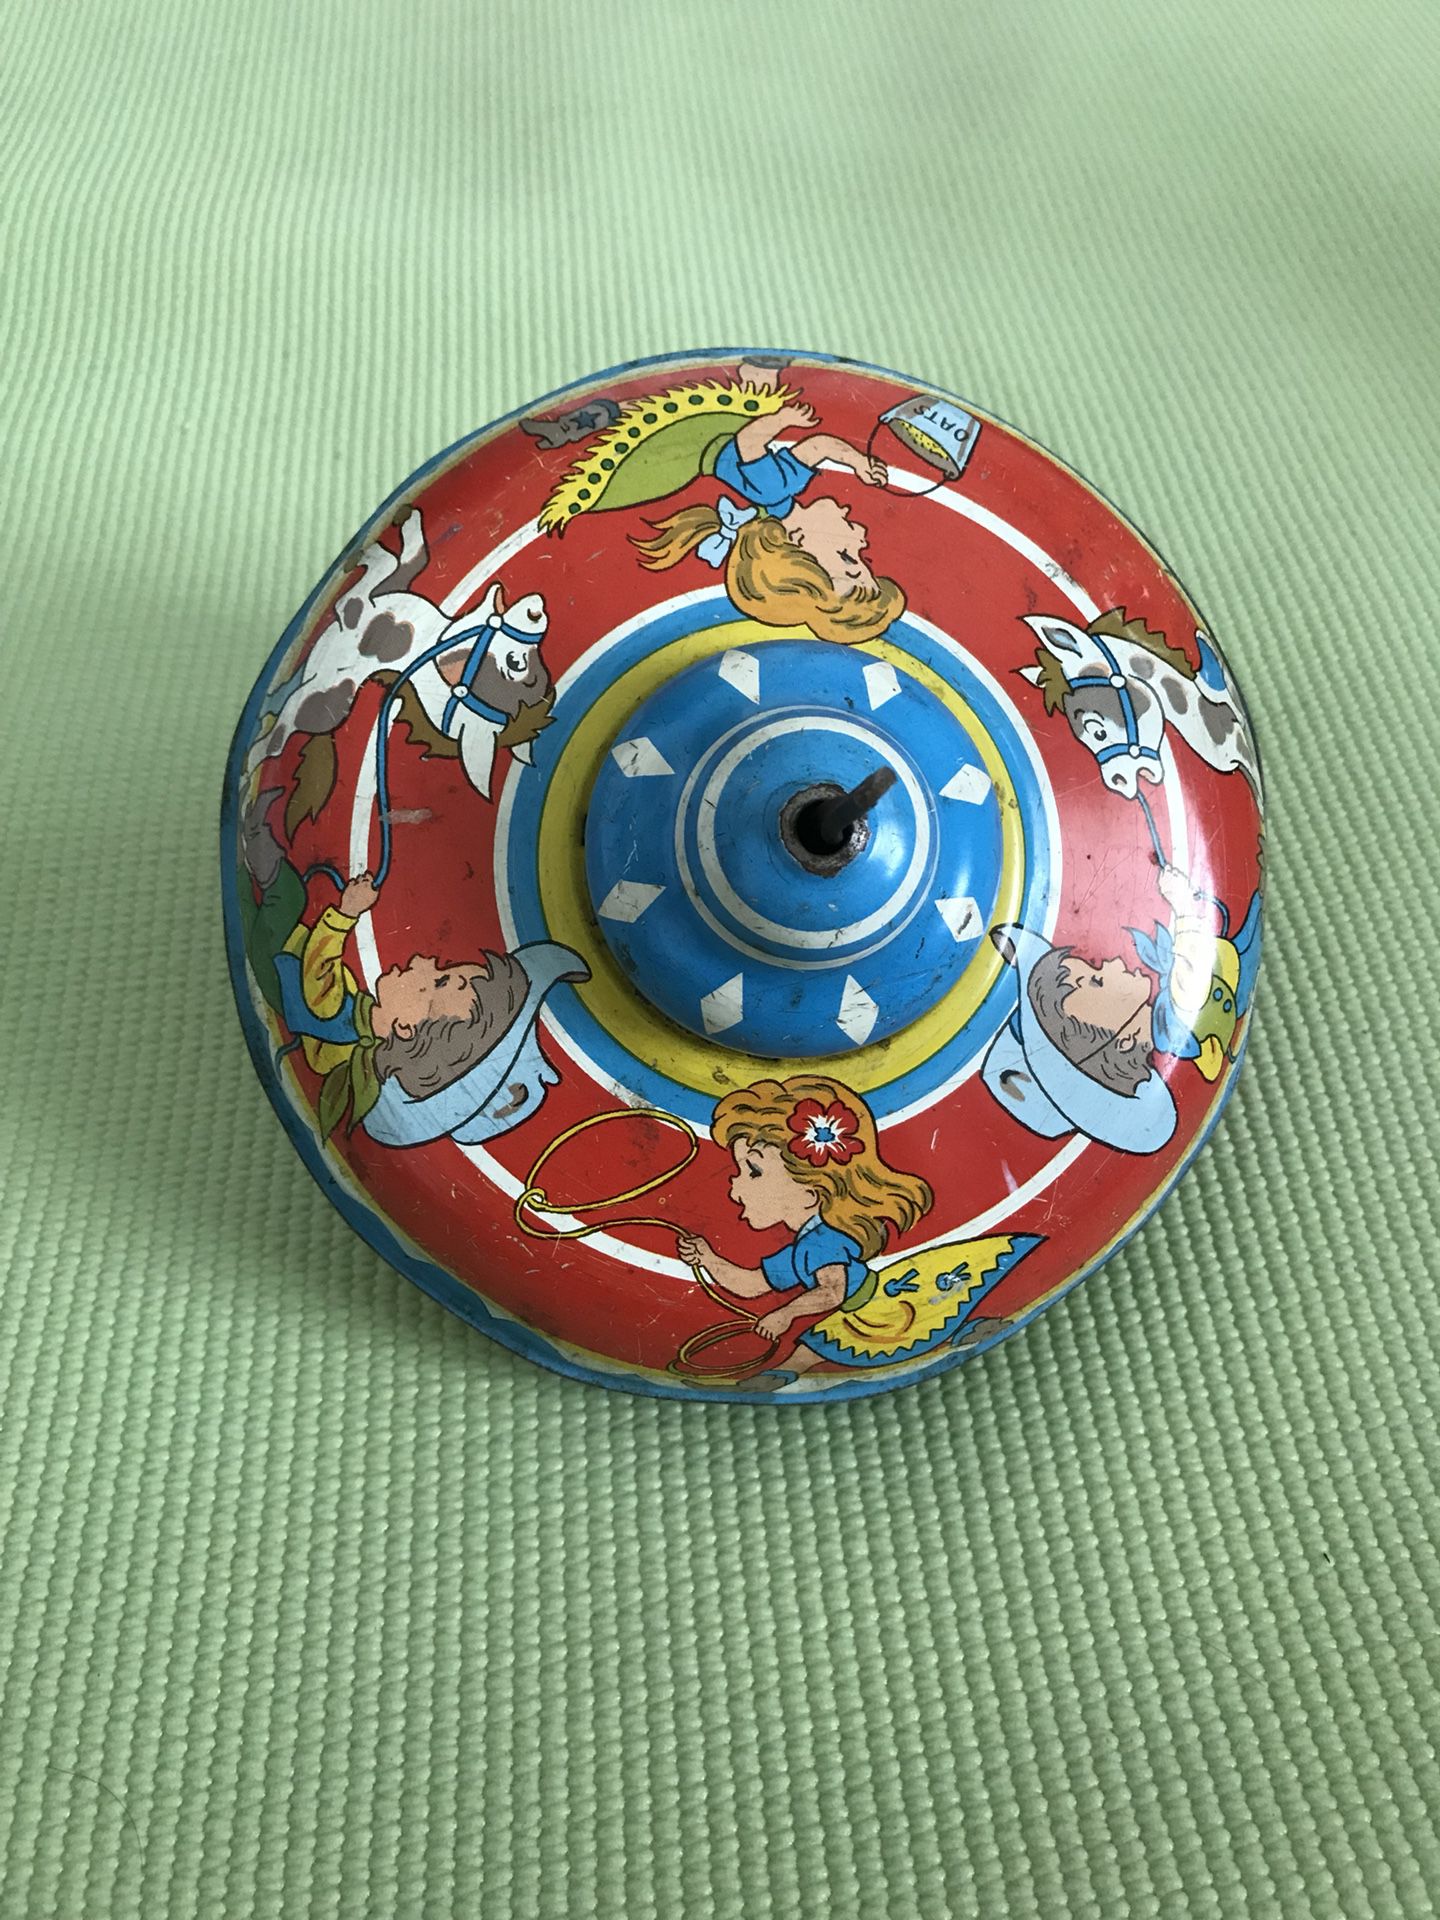 Antique toy spinning top